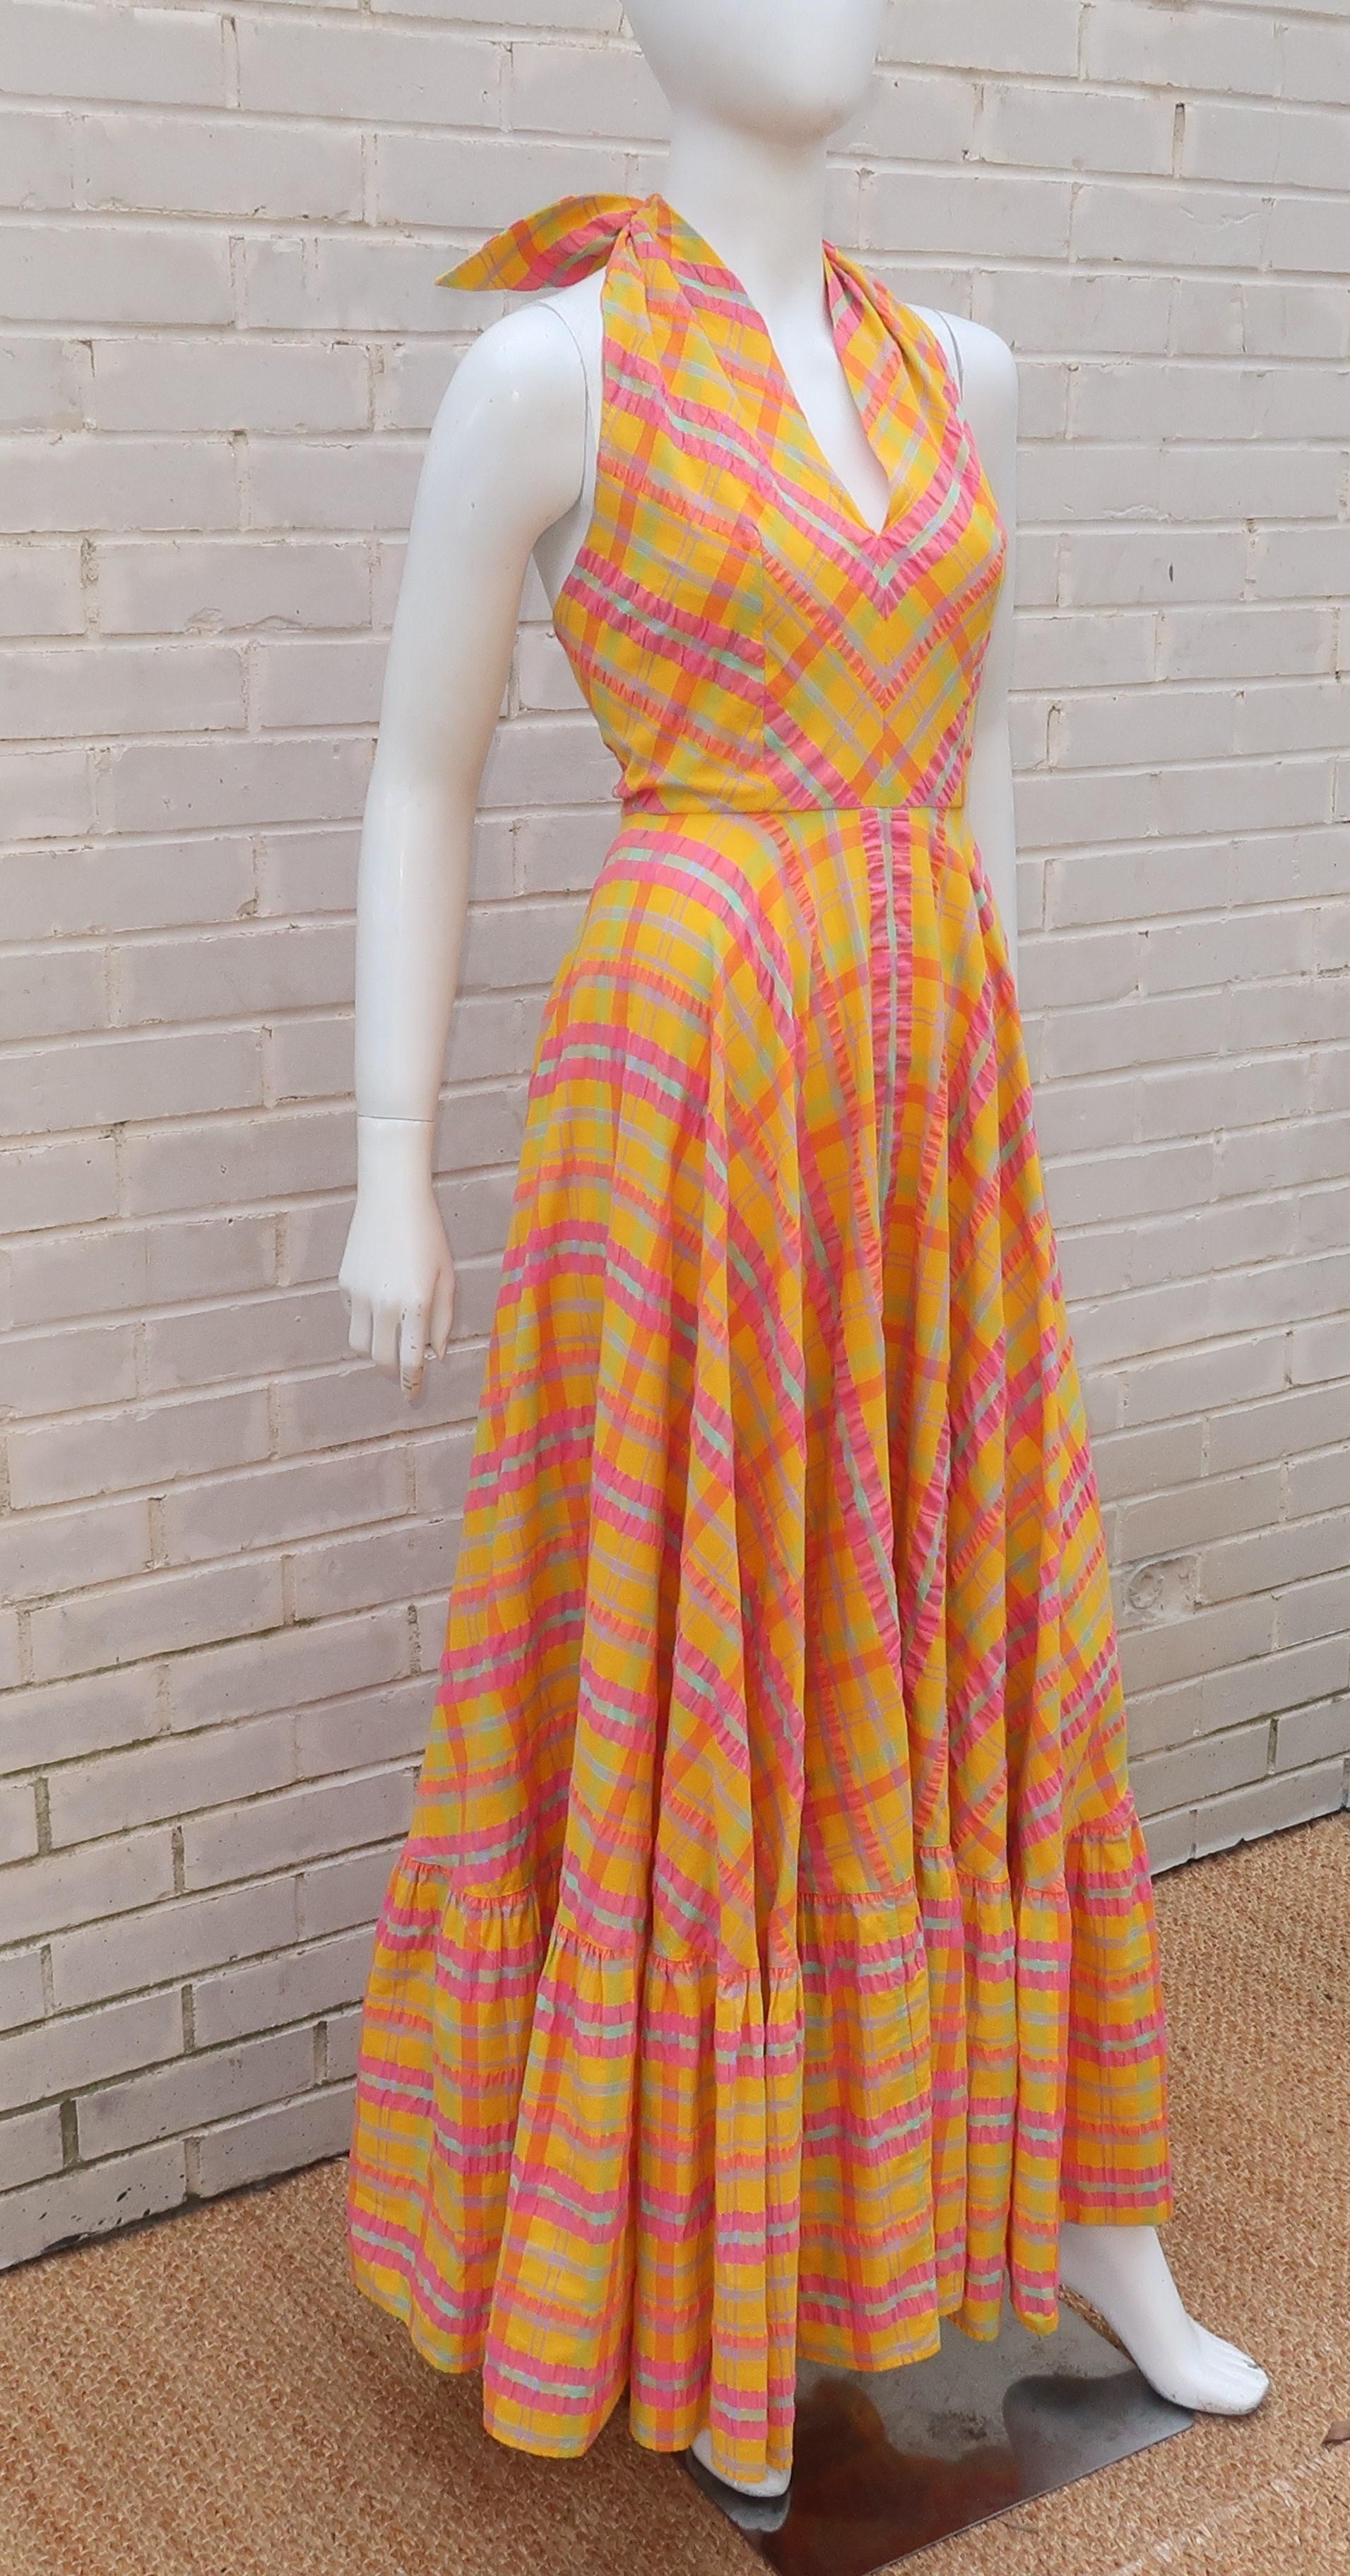 This 1960's Dior Boutique dress for Saks FIfth Avenue is a breath of fresh air in a splash of sunny colors including yellow, orange, pale green, lavender and watermelon pink.  The cotton seersucker plaid fabric is the perfect foil for the peasant